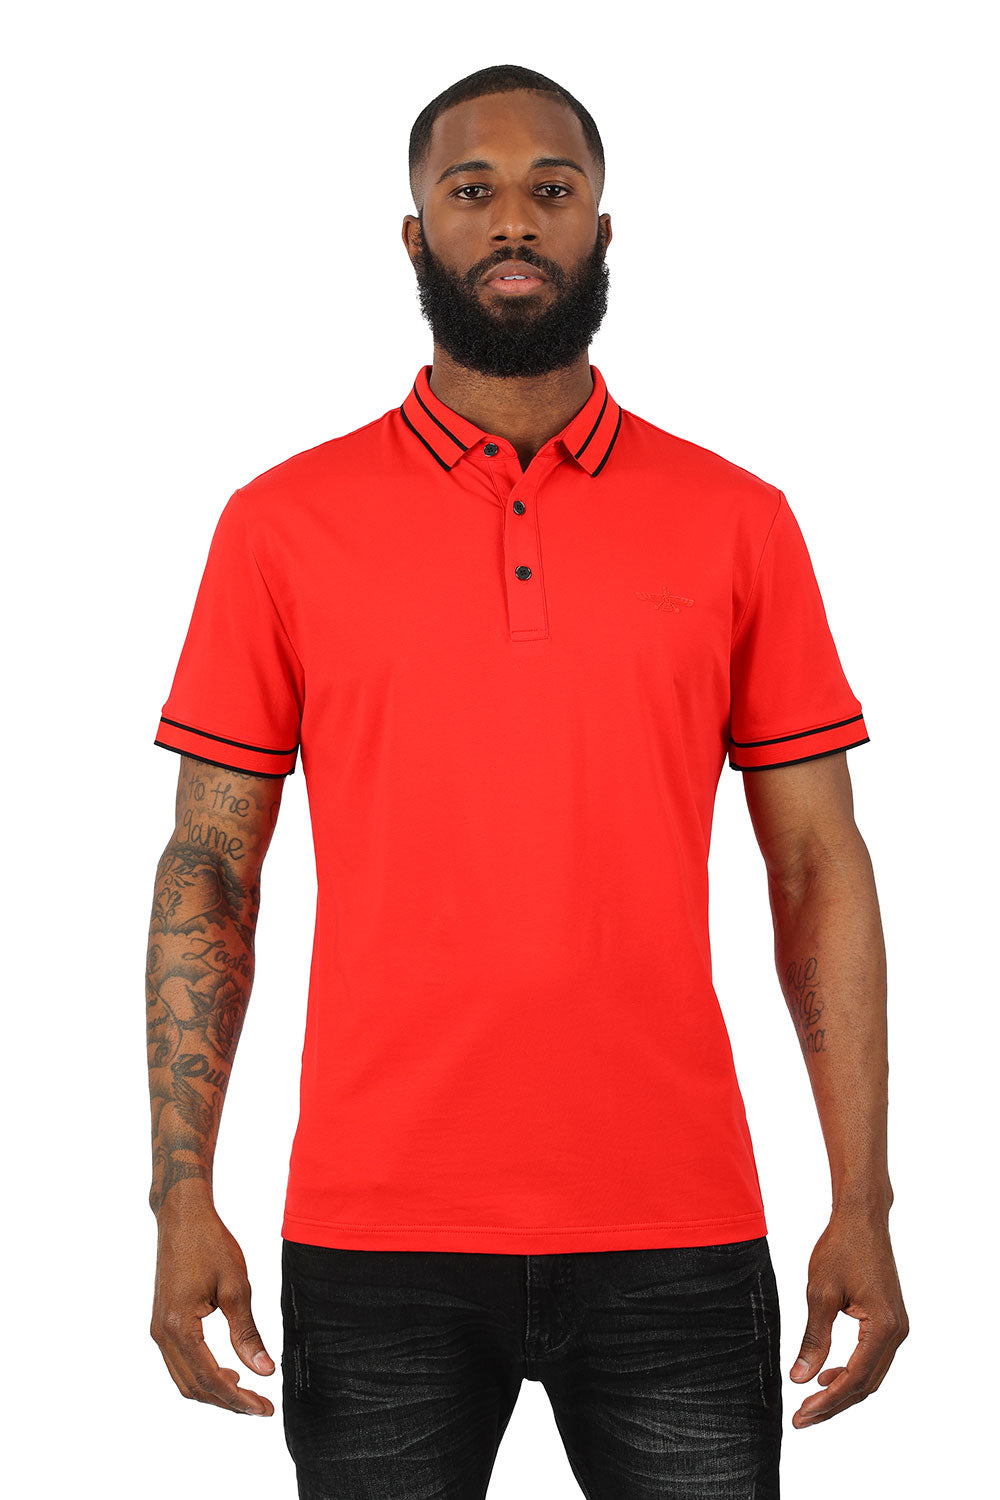 Barabas Men's Solid Color with Logo Polo Shirts 3PP832 Red Black